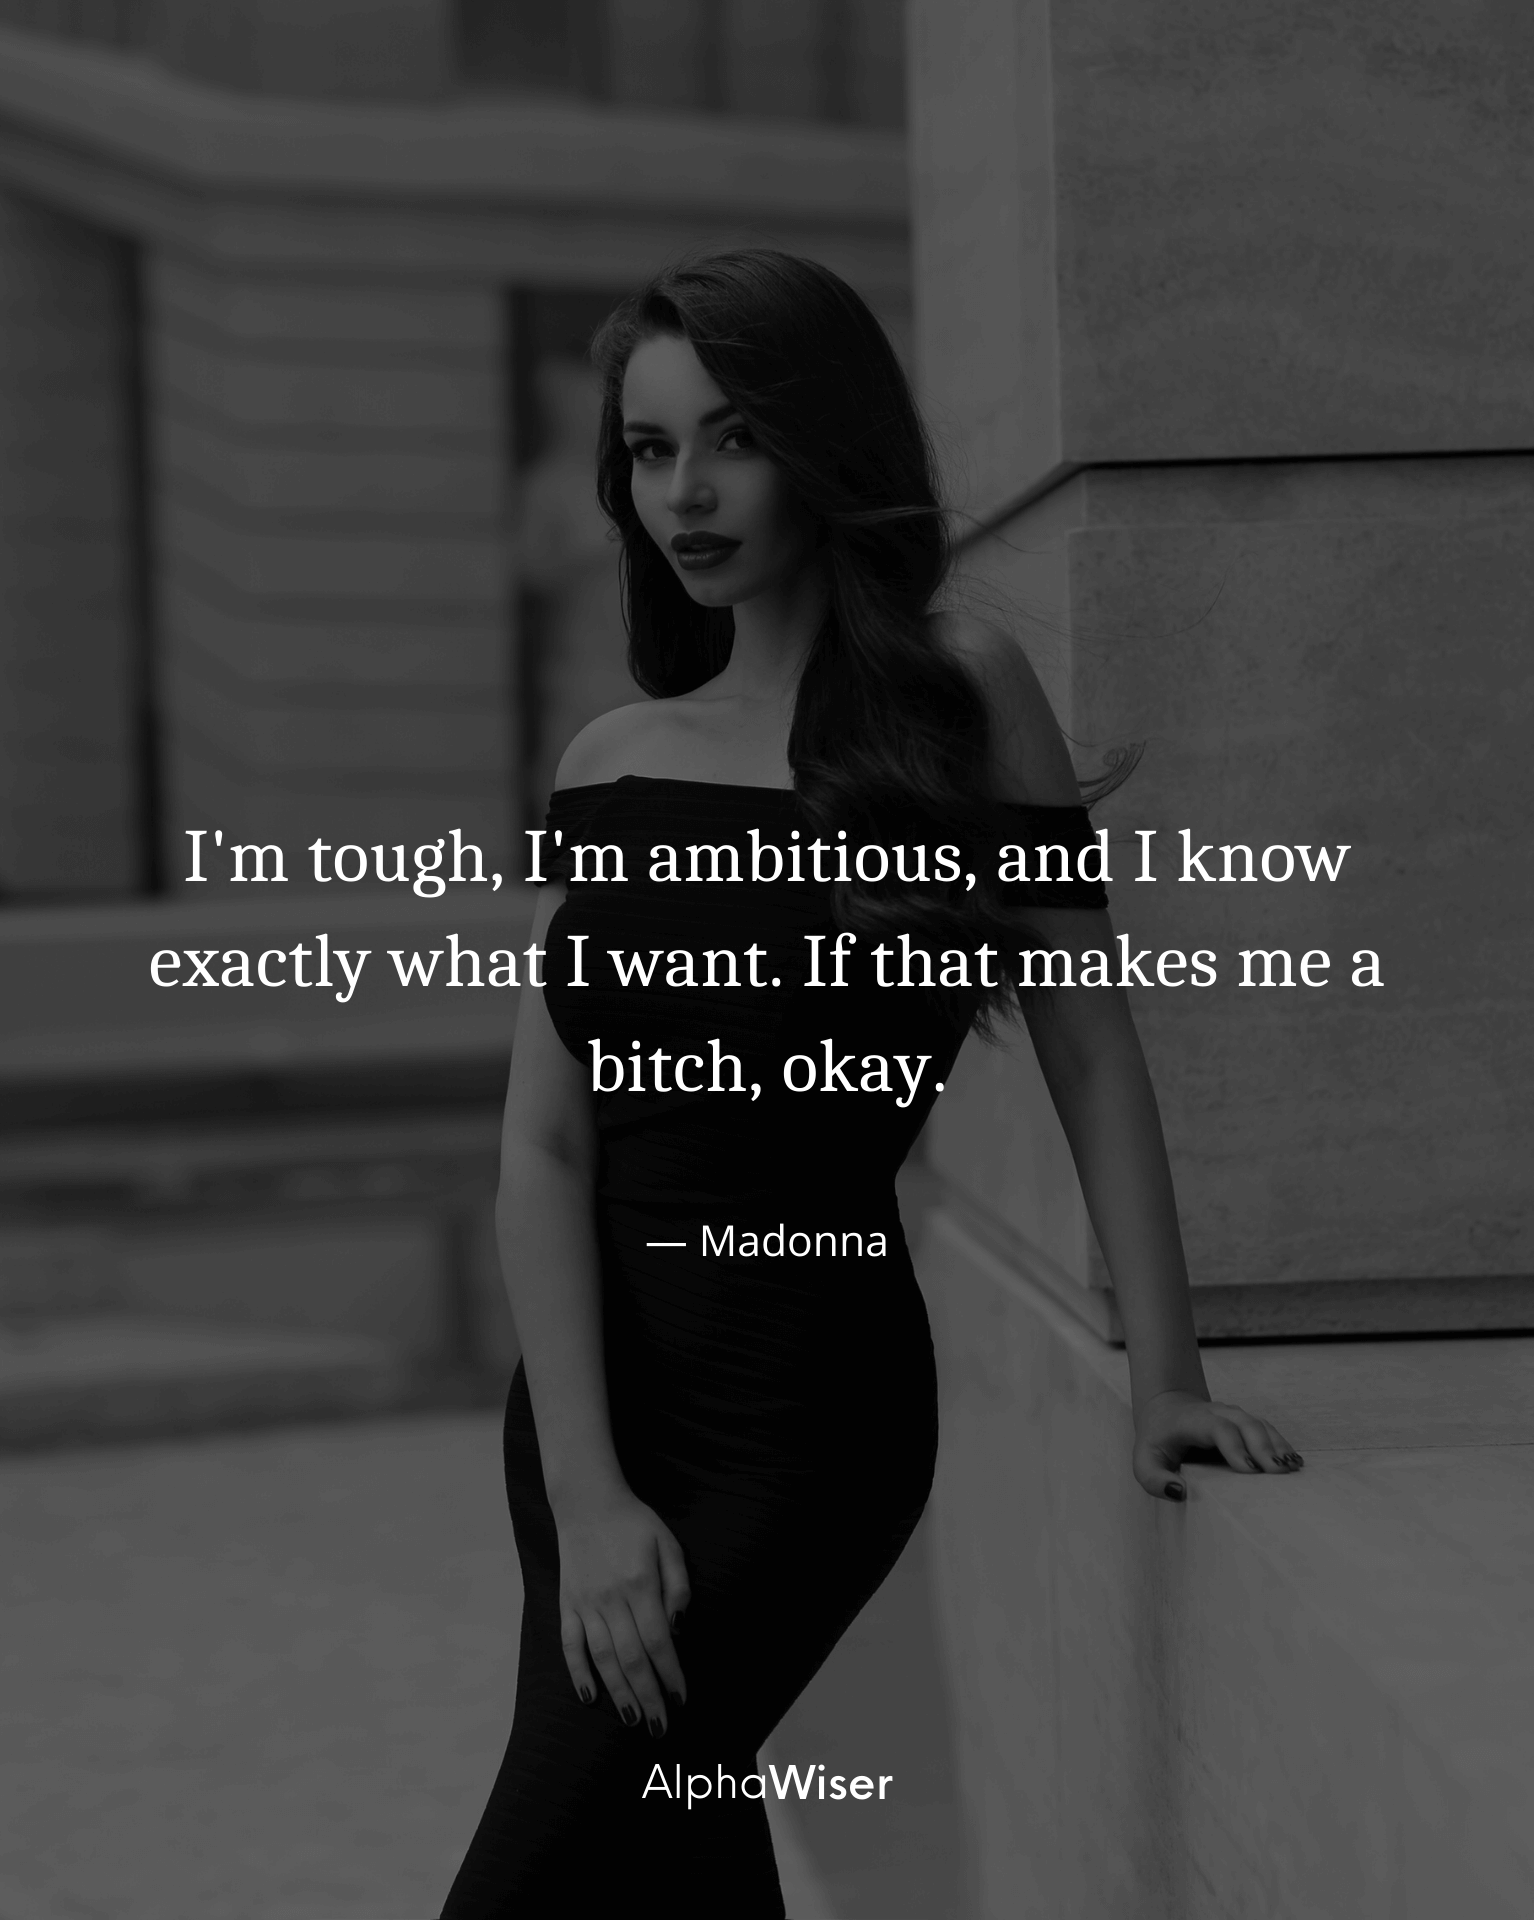 I’m tough, I’m ambitious, and I know exactly what I want. If that makes me a bitch, okay.